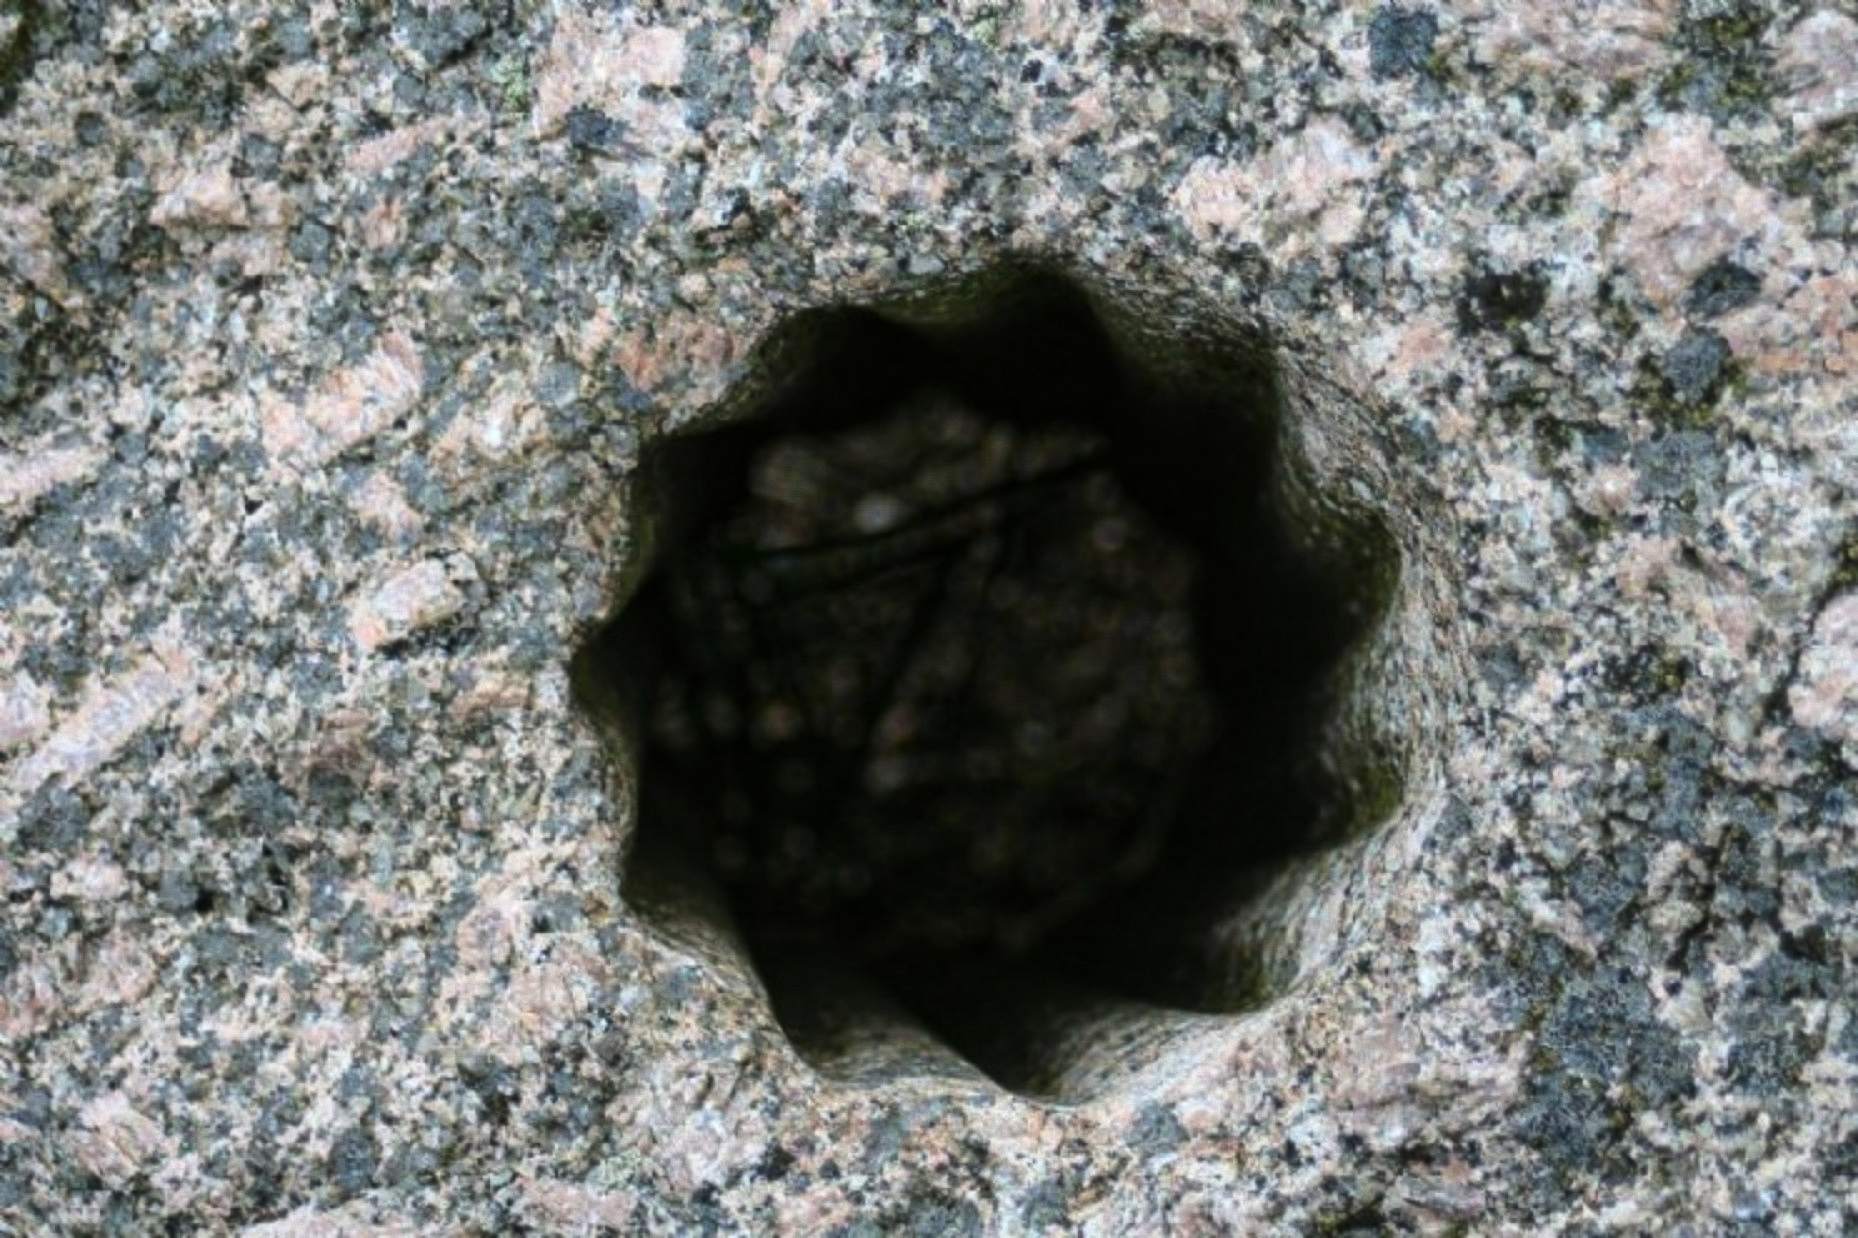 These strange, ancient, star-shaped holes were found carved into hard stone in Volda, Norway – a city that was once home to numerous Norse settlers and is today listed as one of the most important sites for archaeologists in the country.